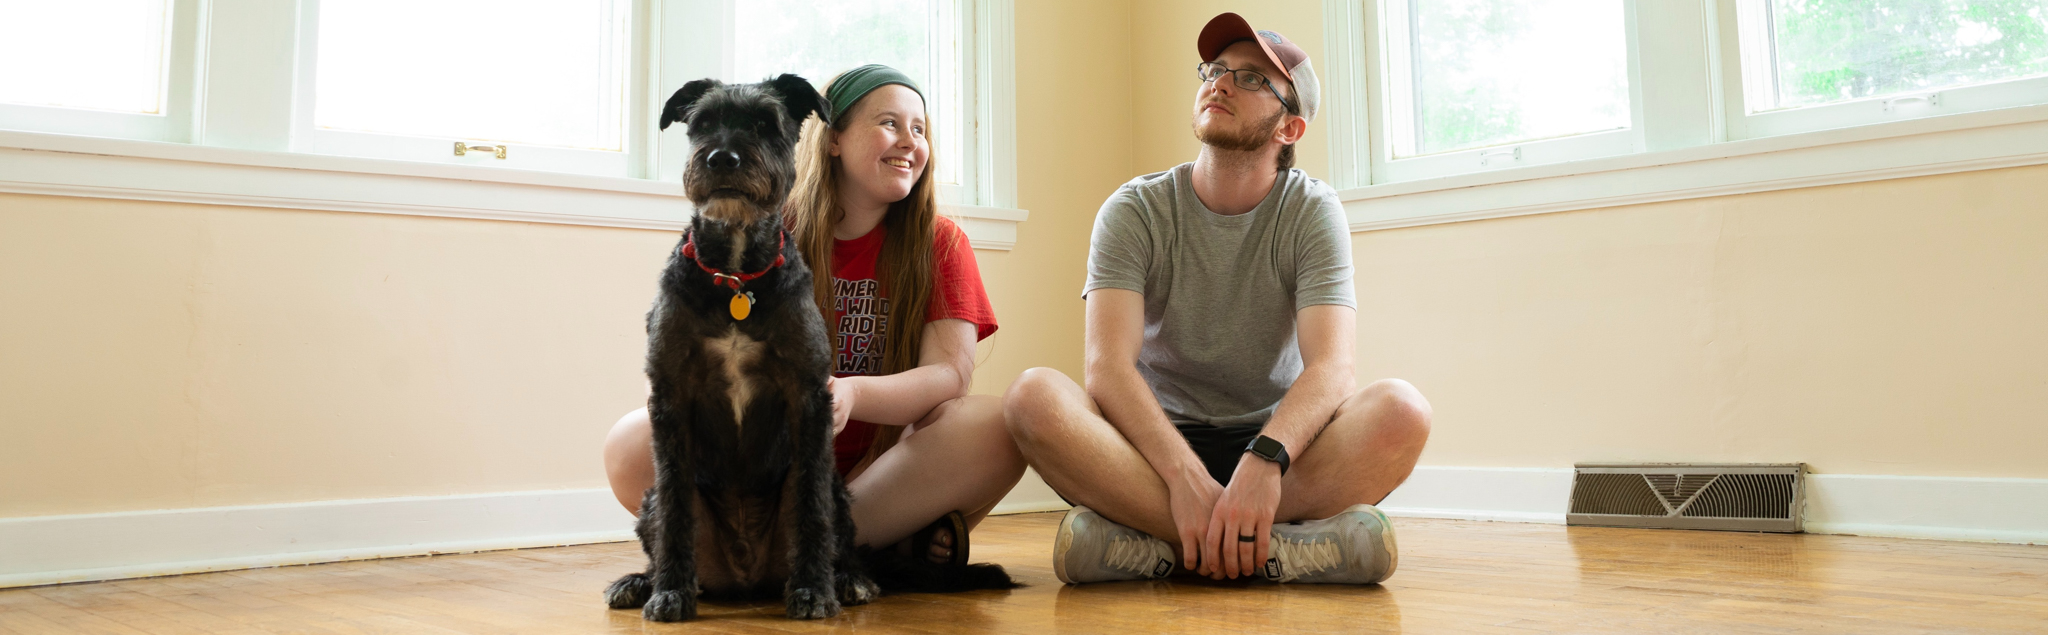 Young couple with dog sitting in unfurnished room